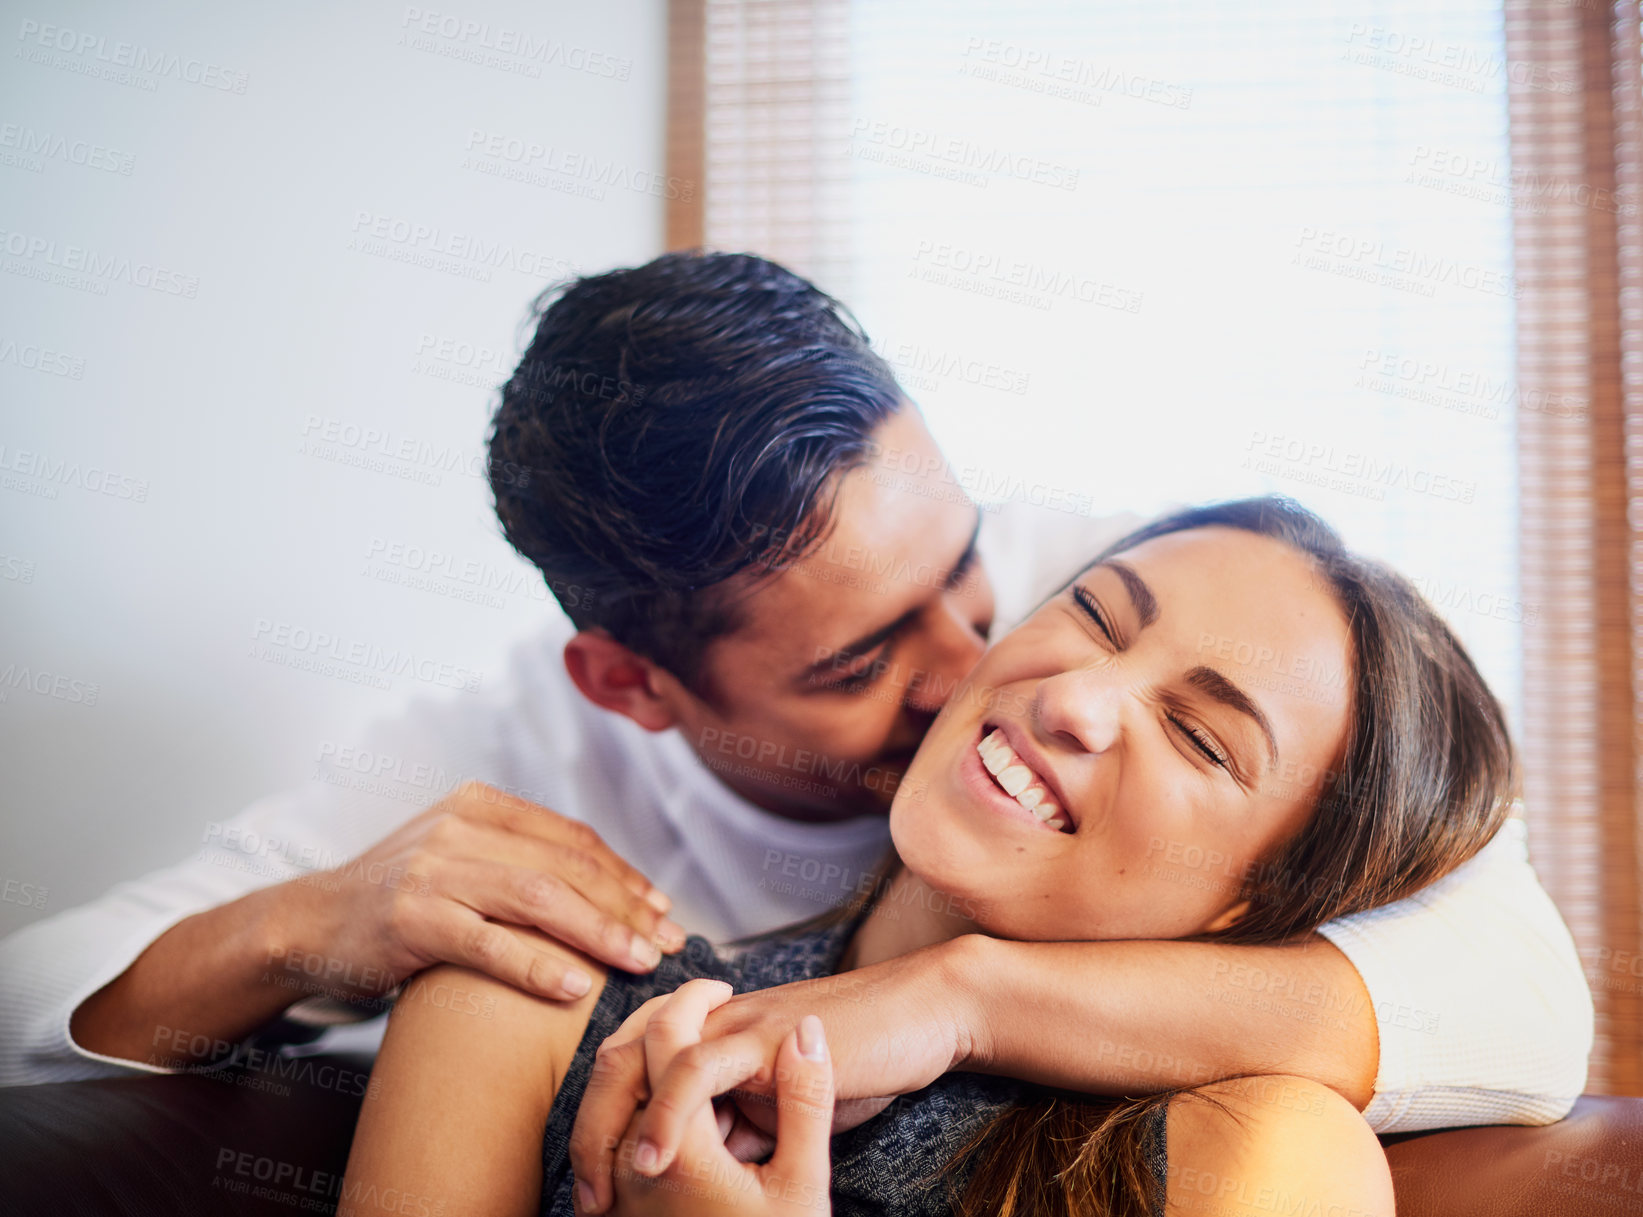 Buy stock photo Shot of a laughing young couple sharing a moment together at home